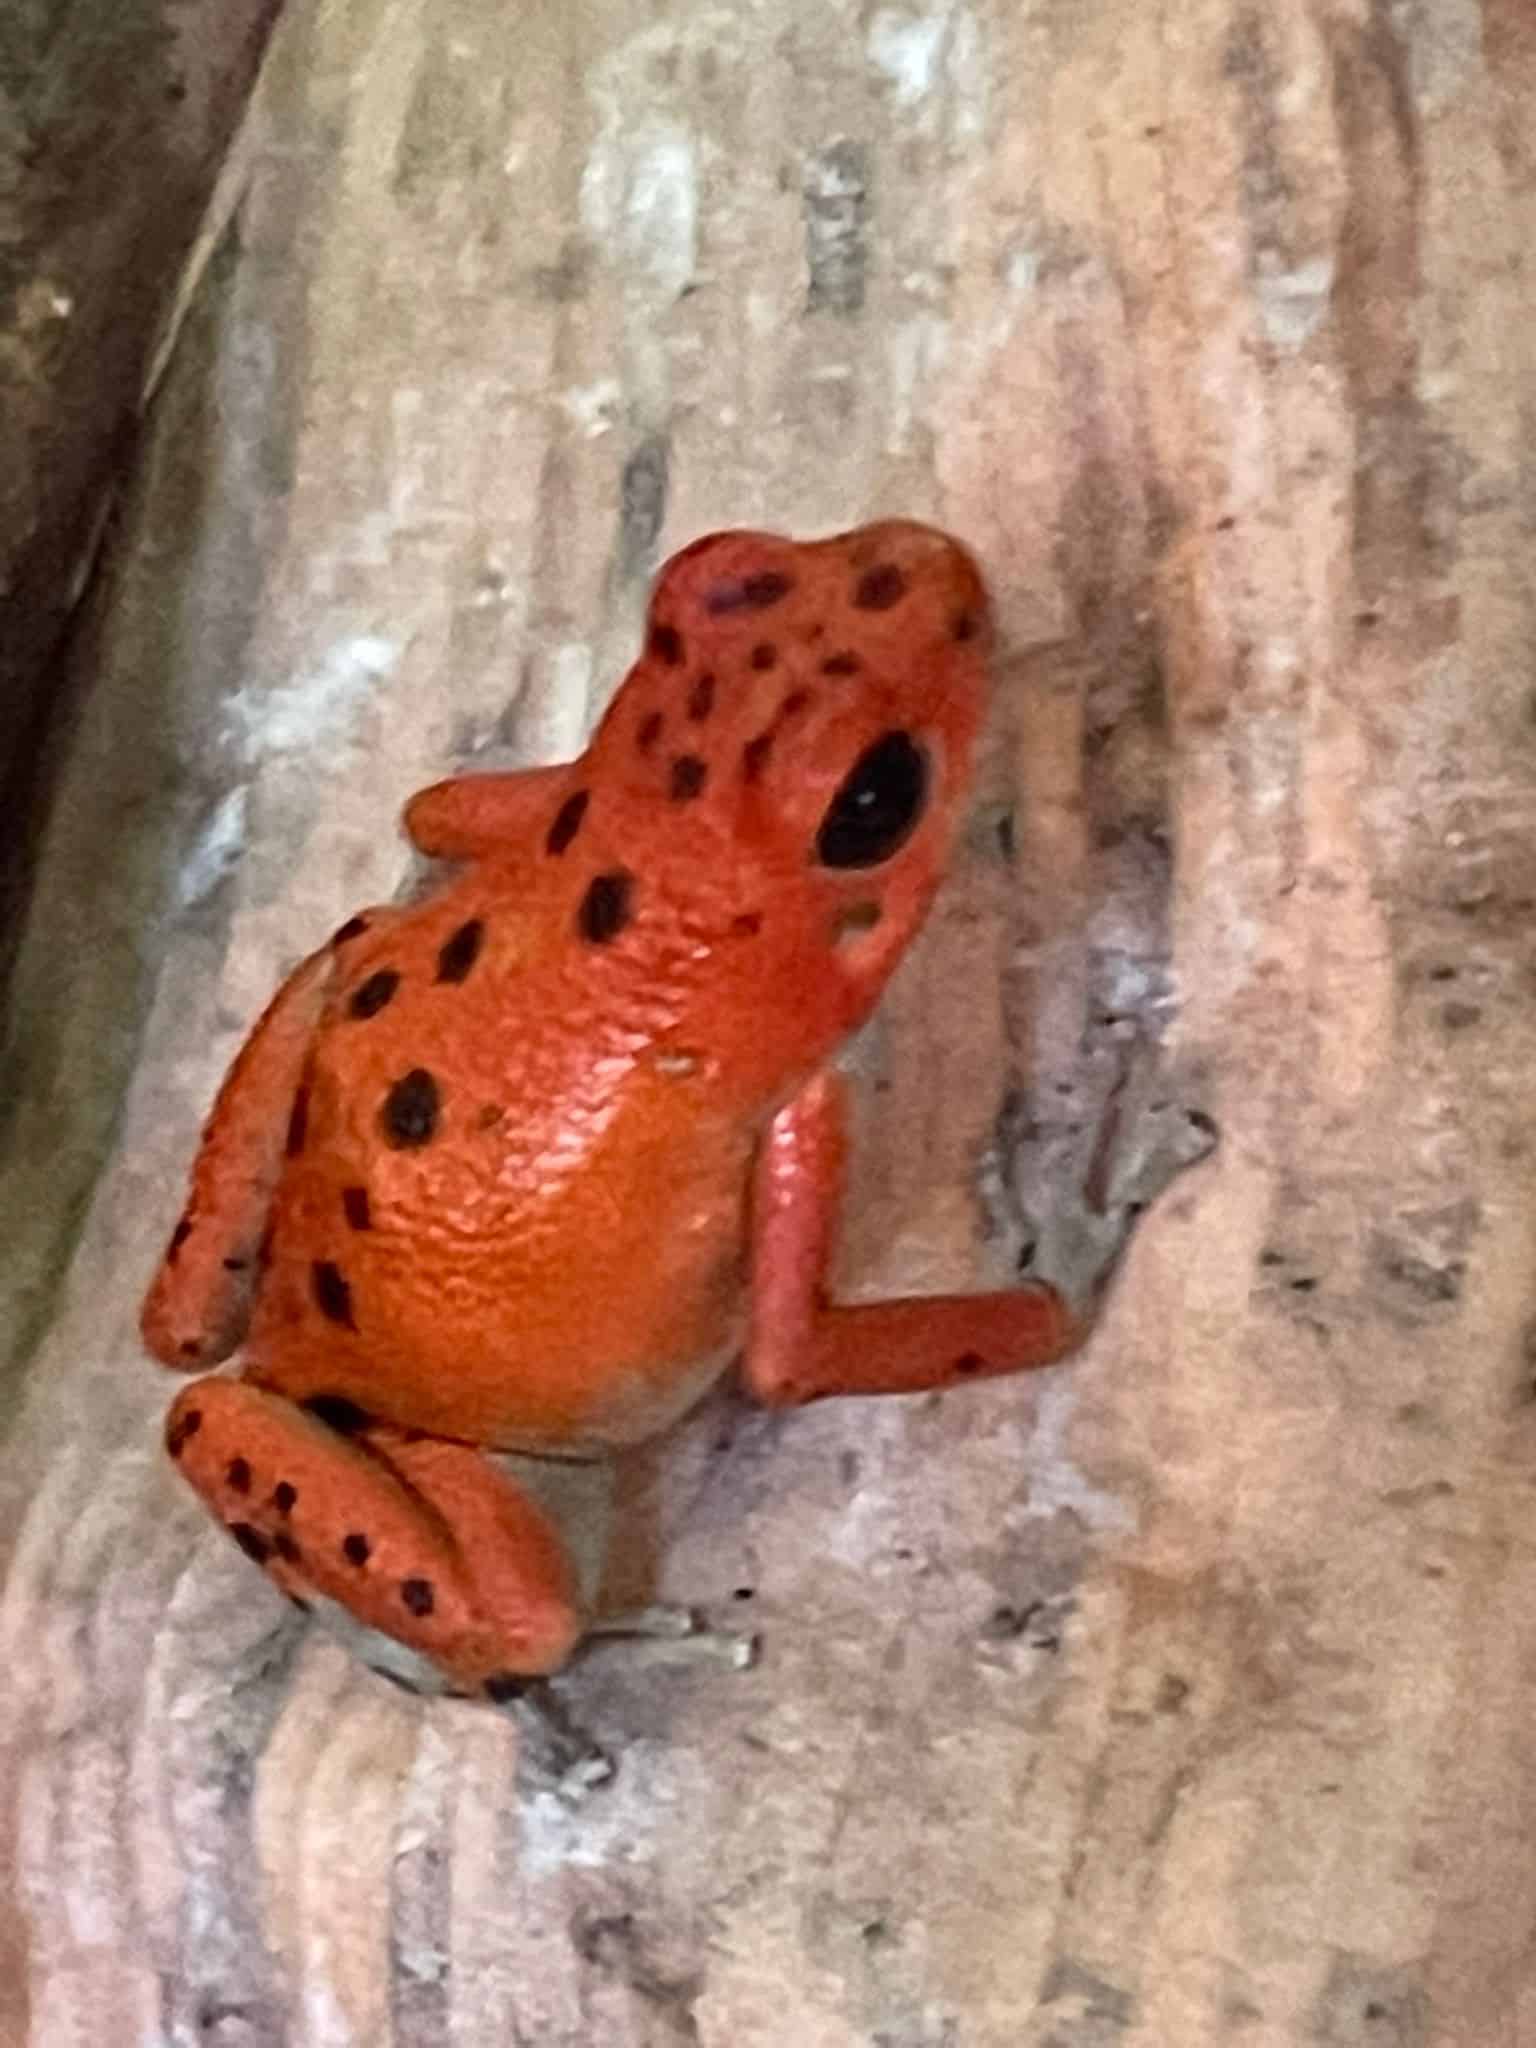 A red poison dart frog with black dots on a tree in Panama on Bastimentos Island